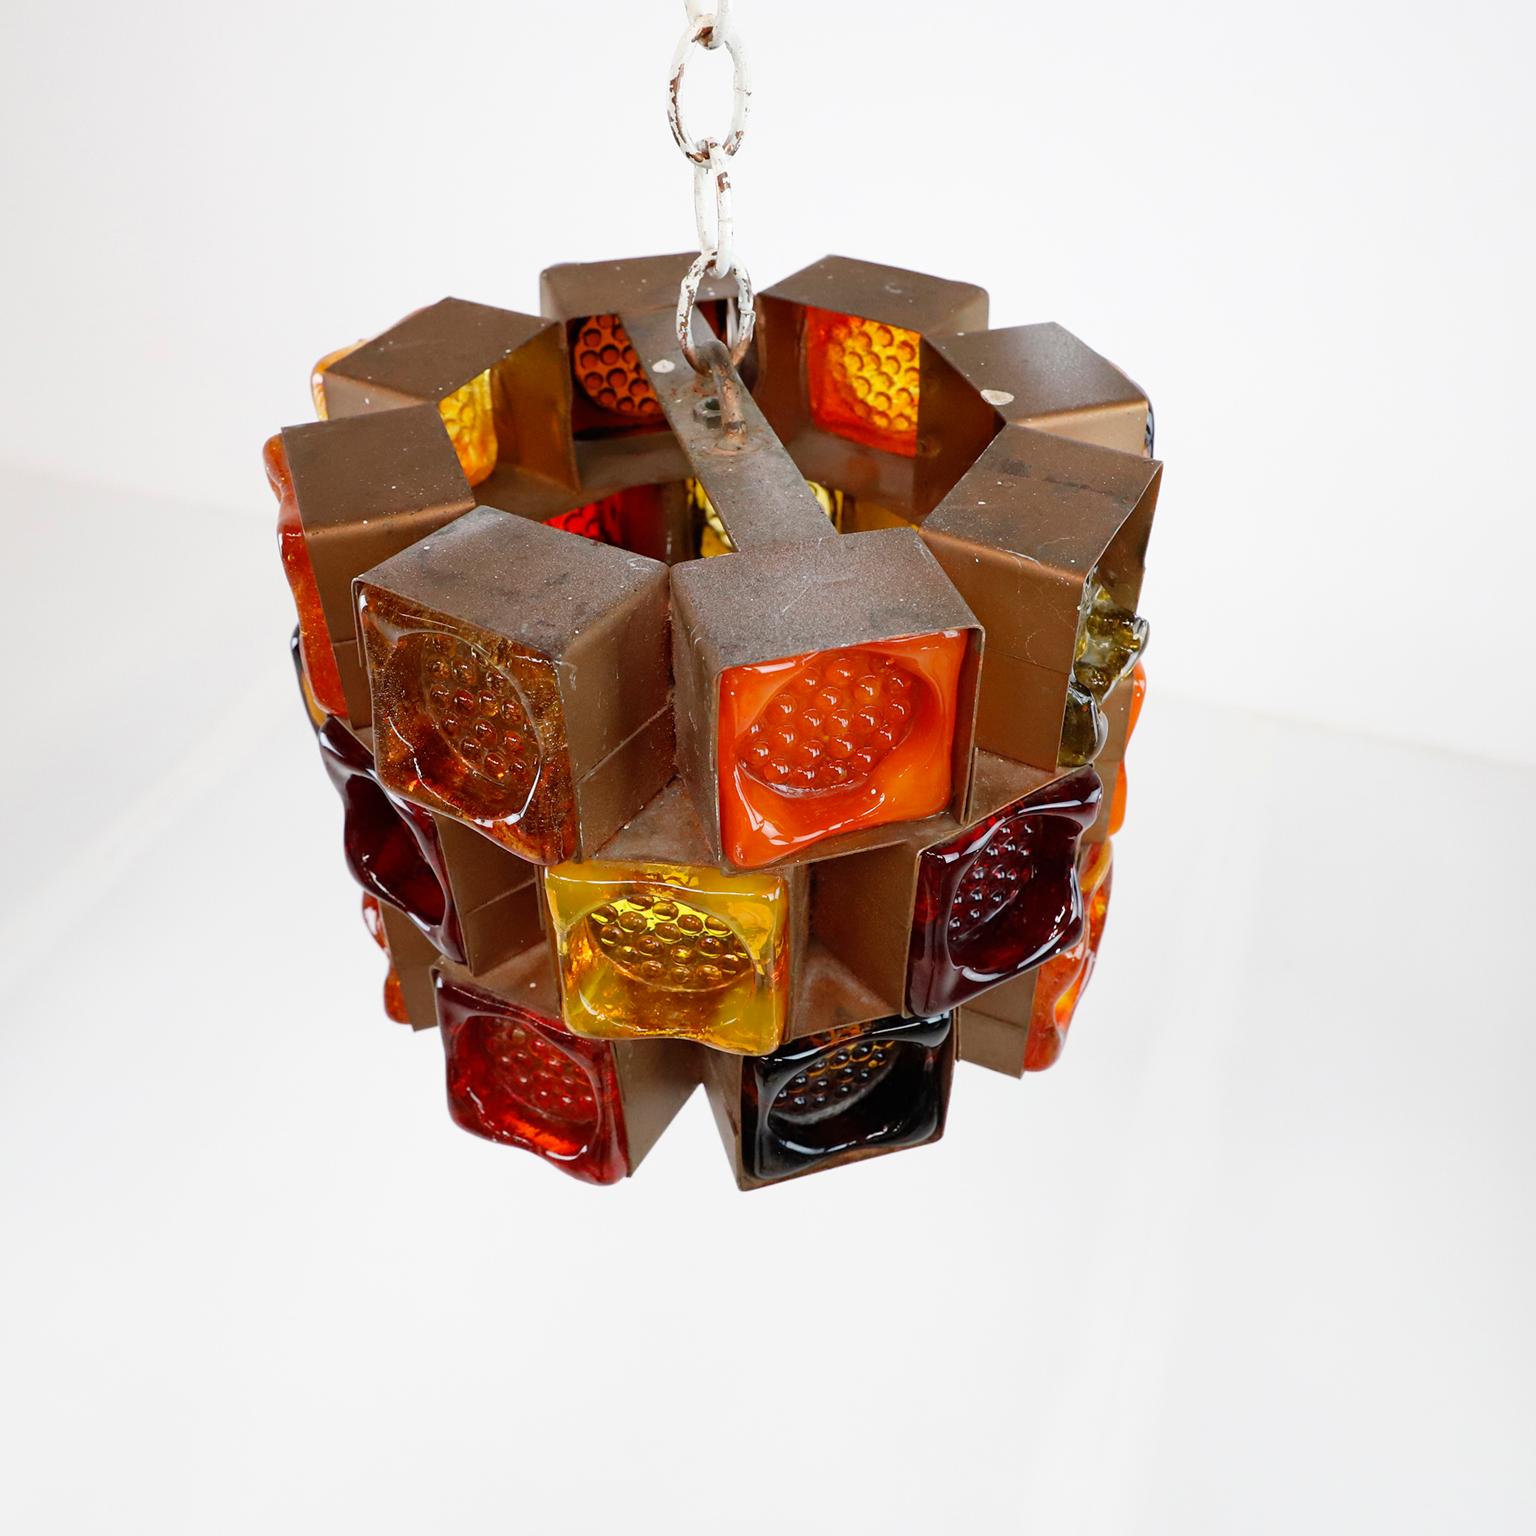 Circa 1970, we offer these original pendant light designed by Felipe Delfinger. Made of iron and multicolored blown glass. One glass is broken but it does not affect the lighting (see pic 3).